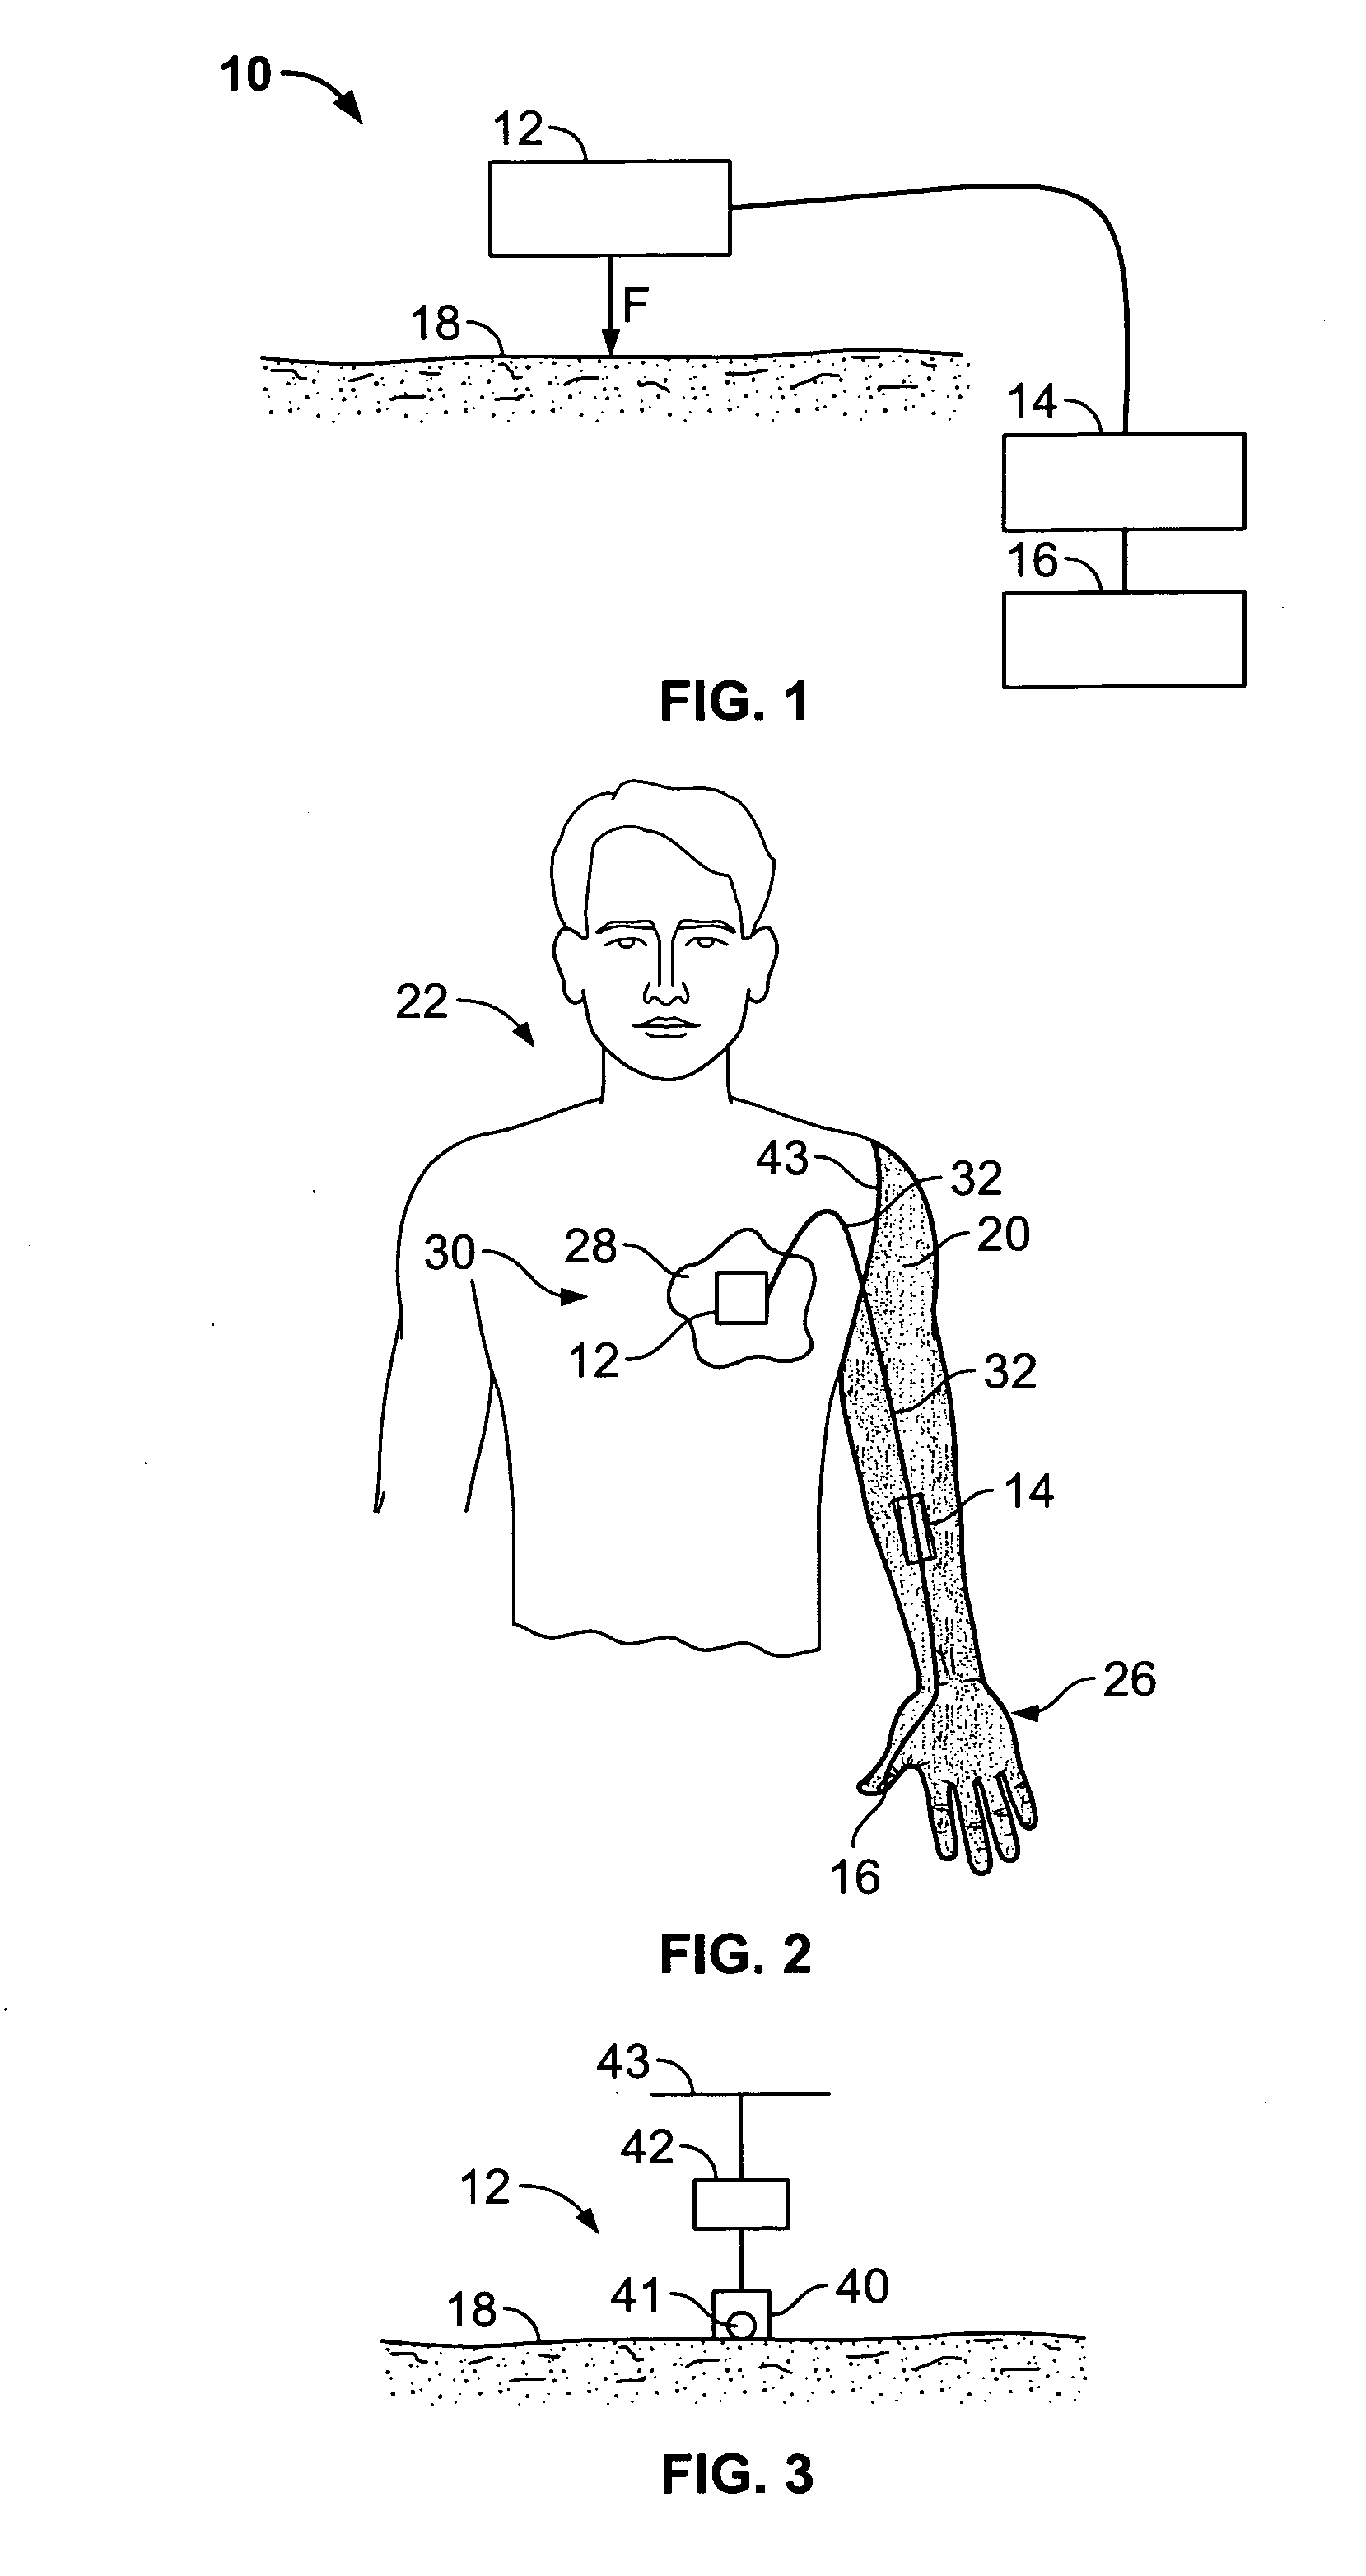 System and method for improving the functionality of prostheses